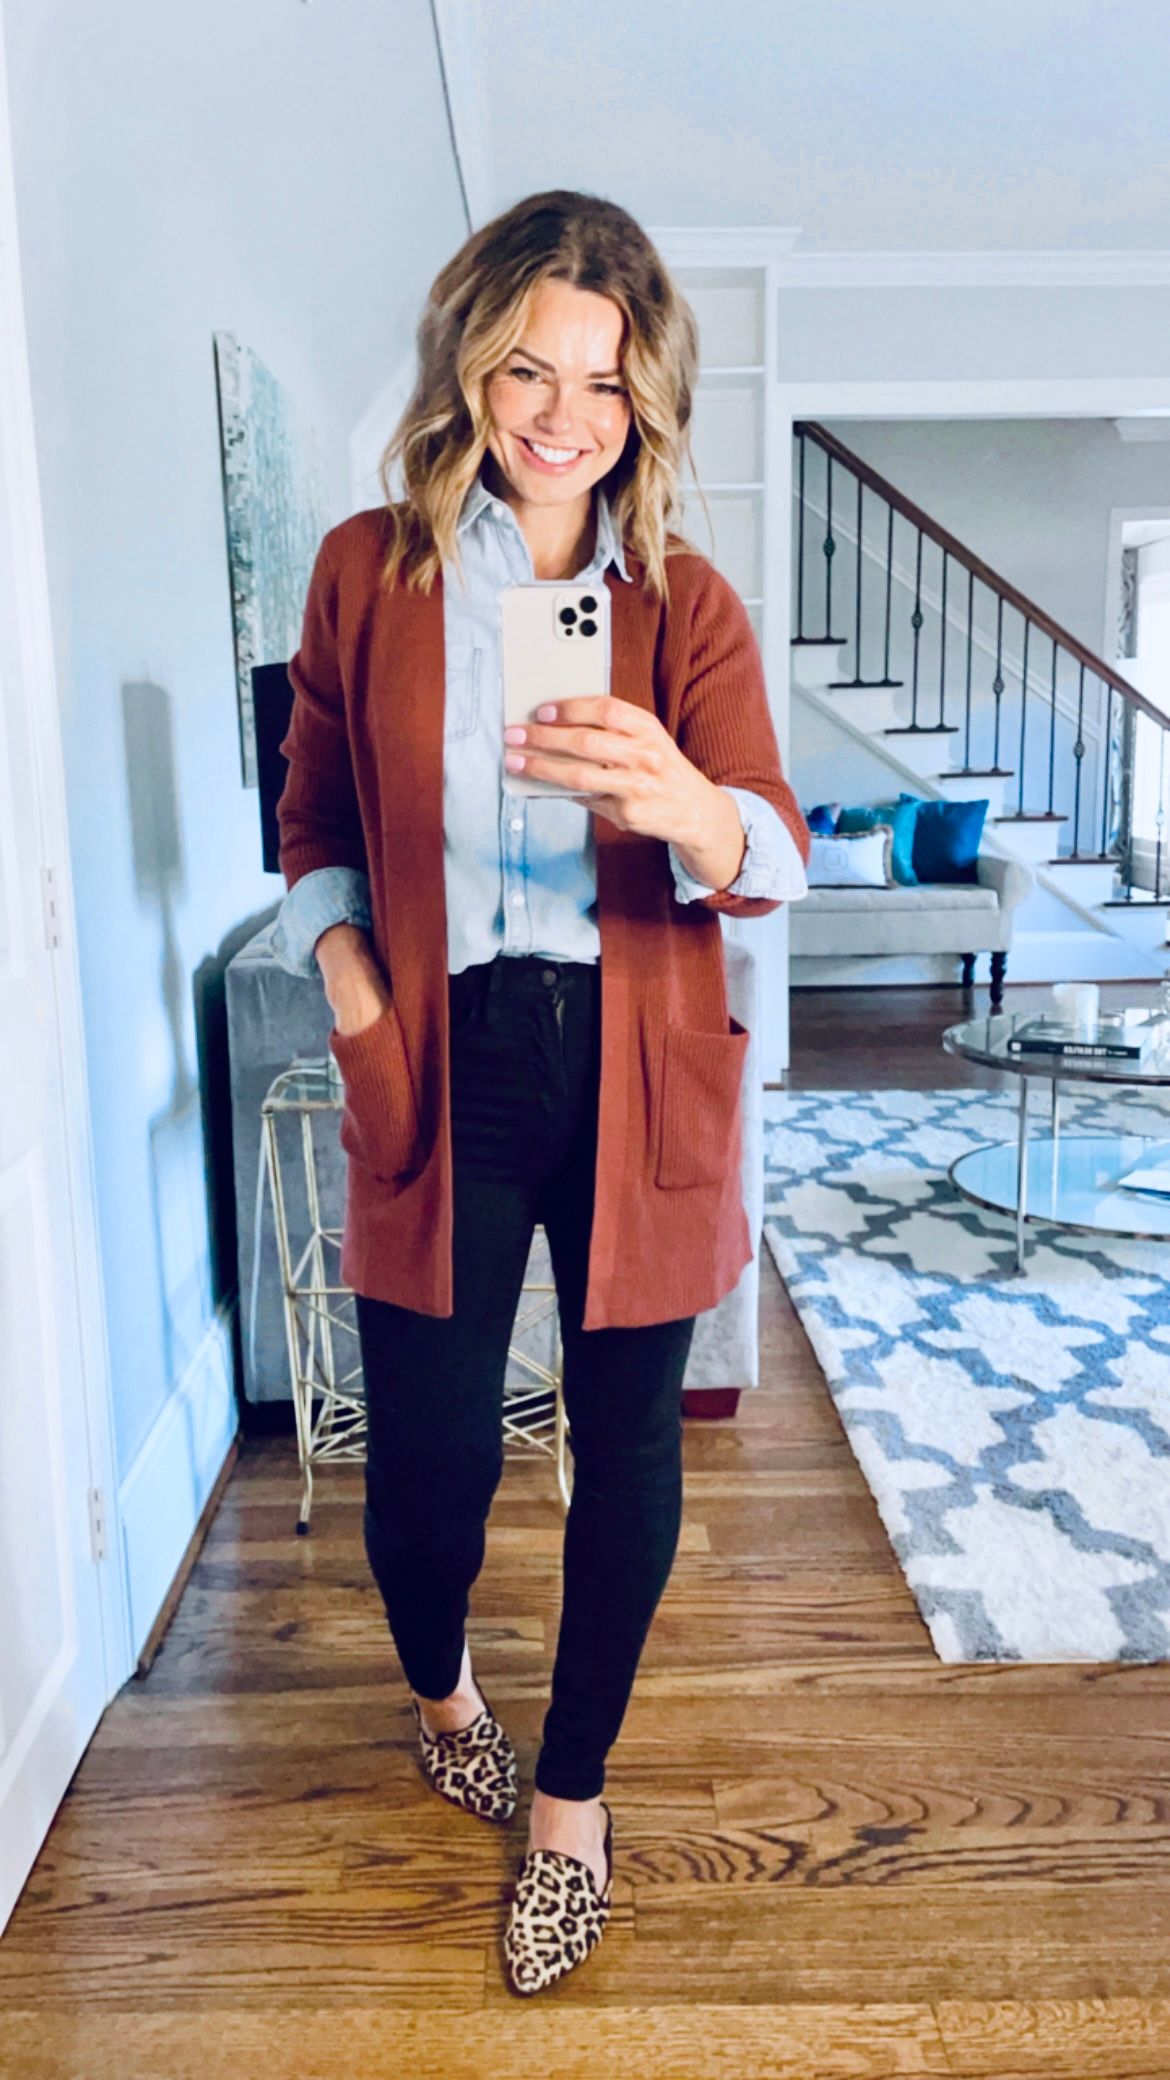 Happy woman taking a full body selfie in her living room, wearing a chambray button down long sleeve shirt tucked into black skinny jeans, with a warm brown sweater and animal print shoes